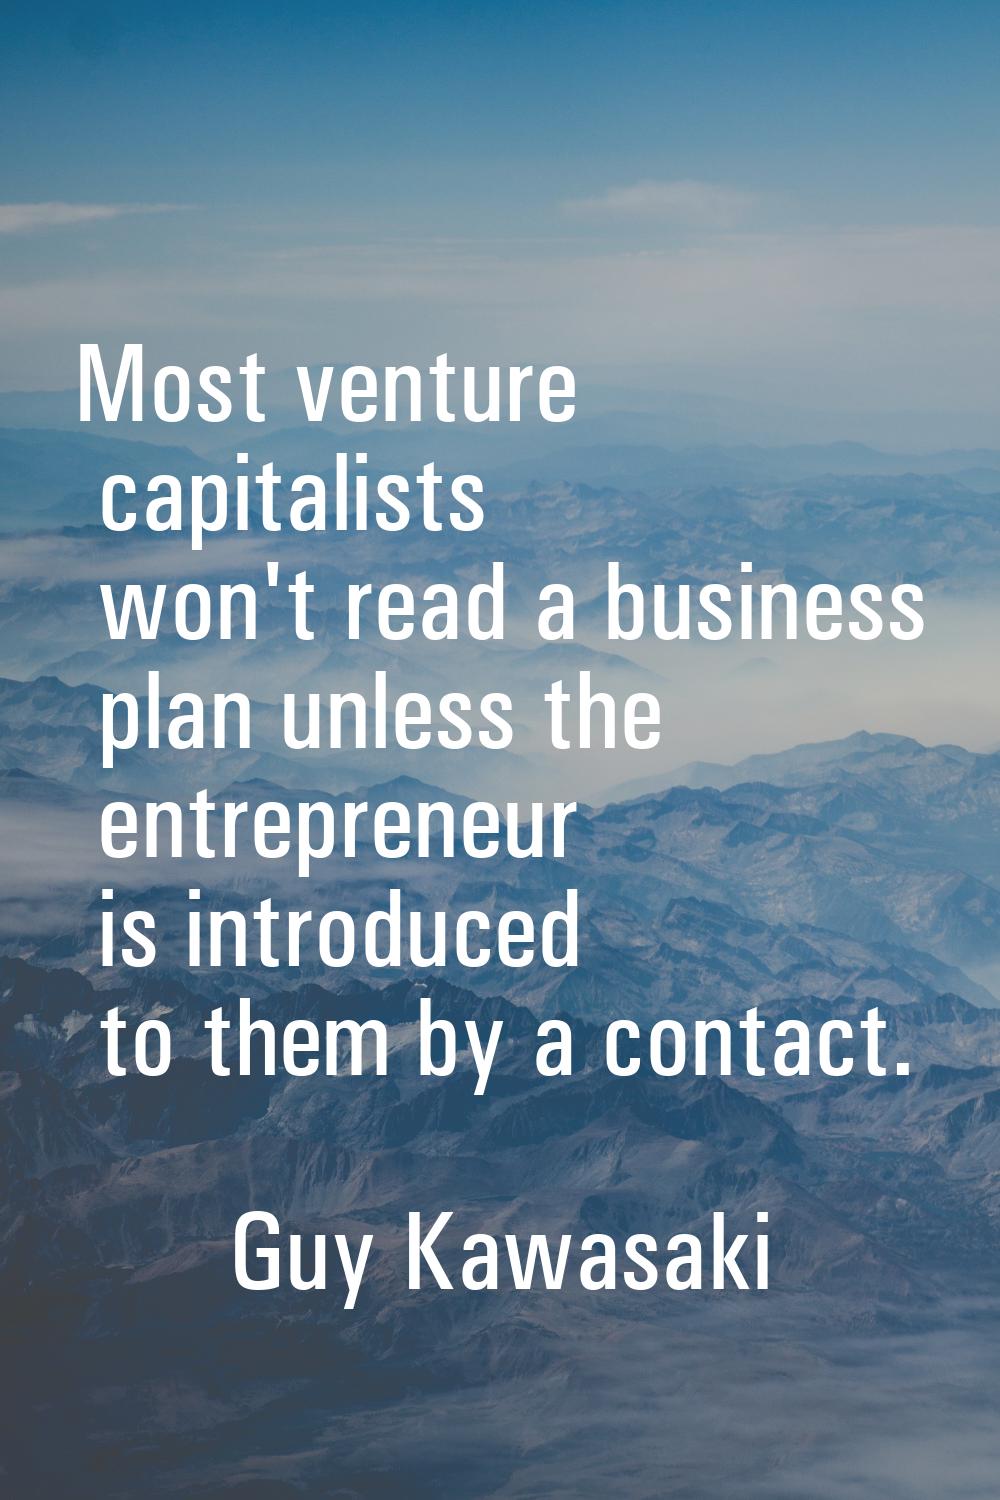 Most venture capitalists won't read a business plan unless the entrepreneur is introduced to them b